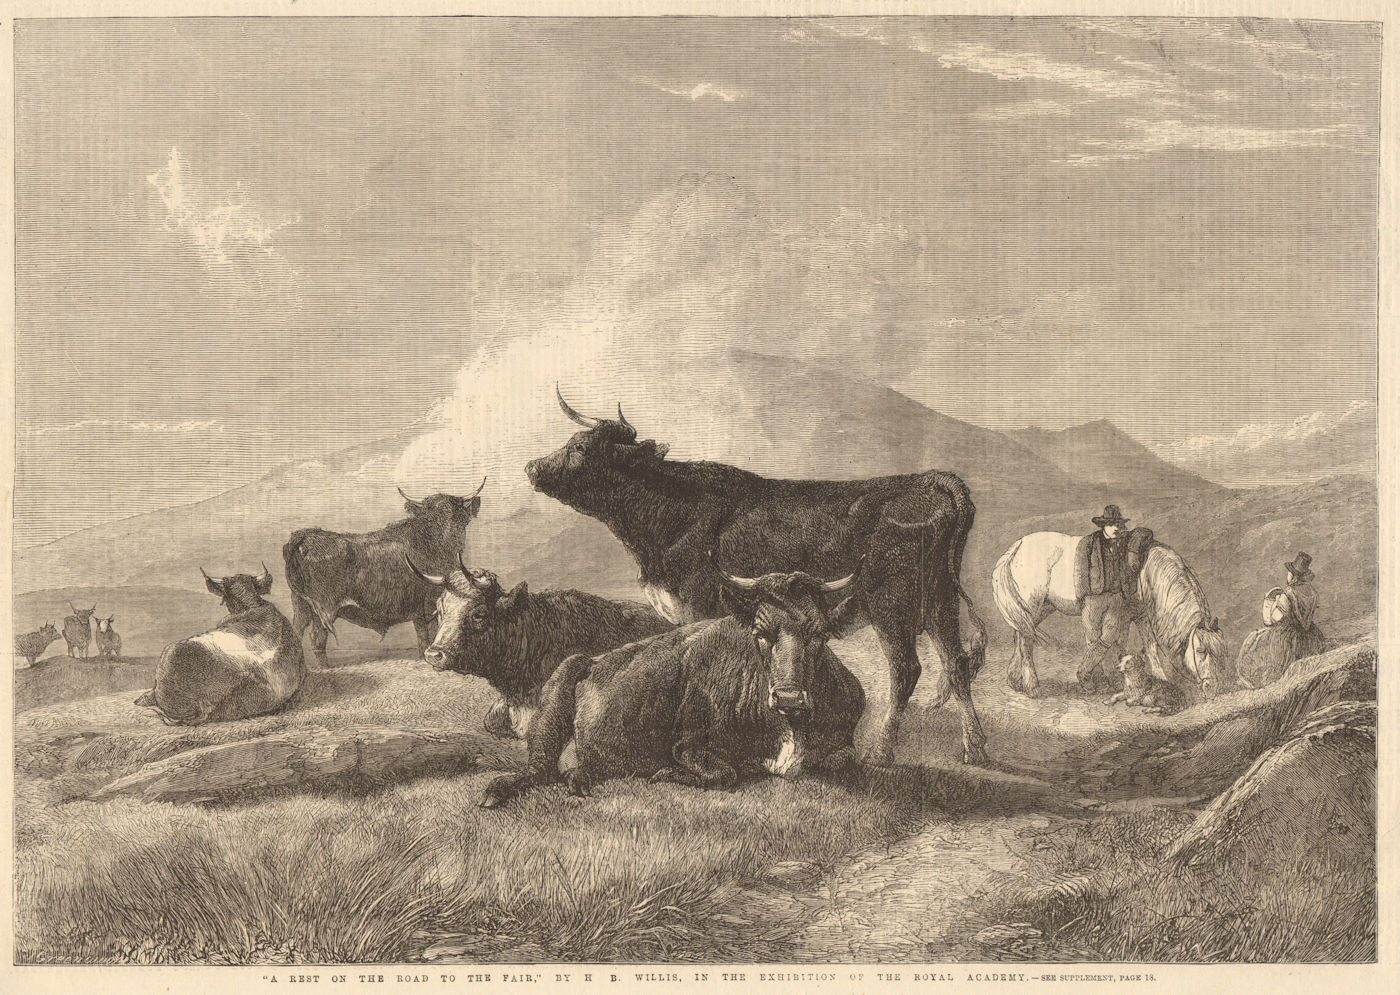 Associate Product "A rest on the road to the fair "by H. B. Willis. Cattle. Fine arts 1861